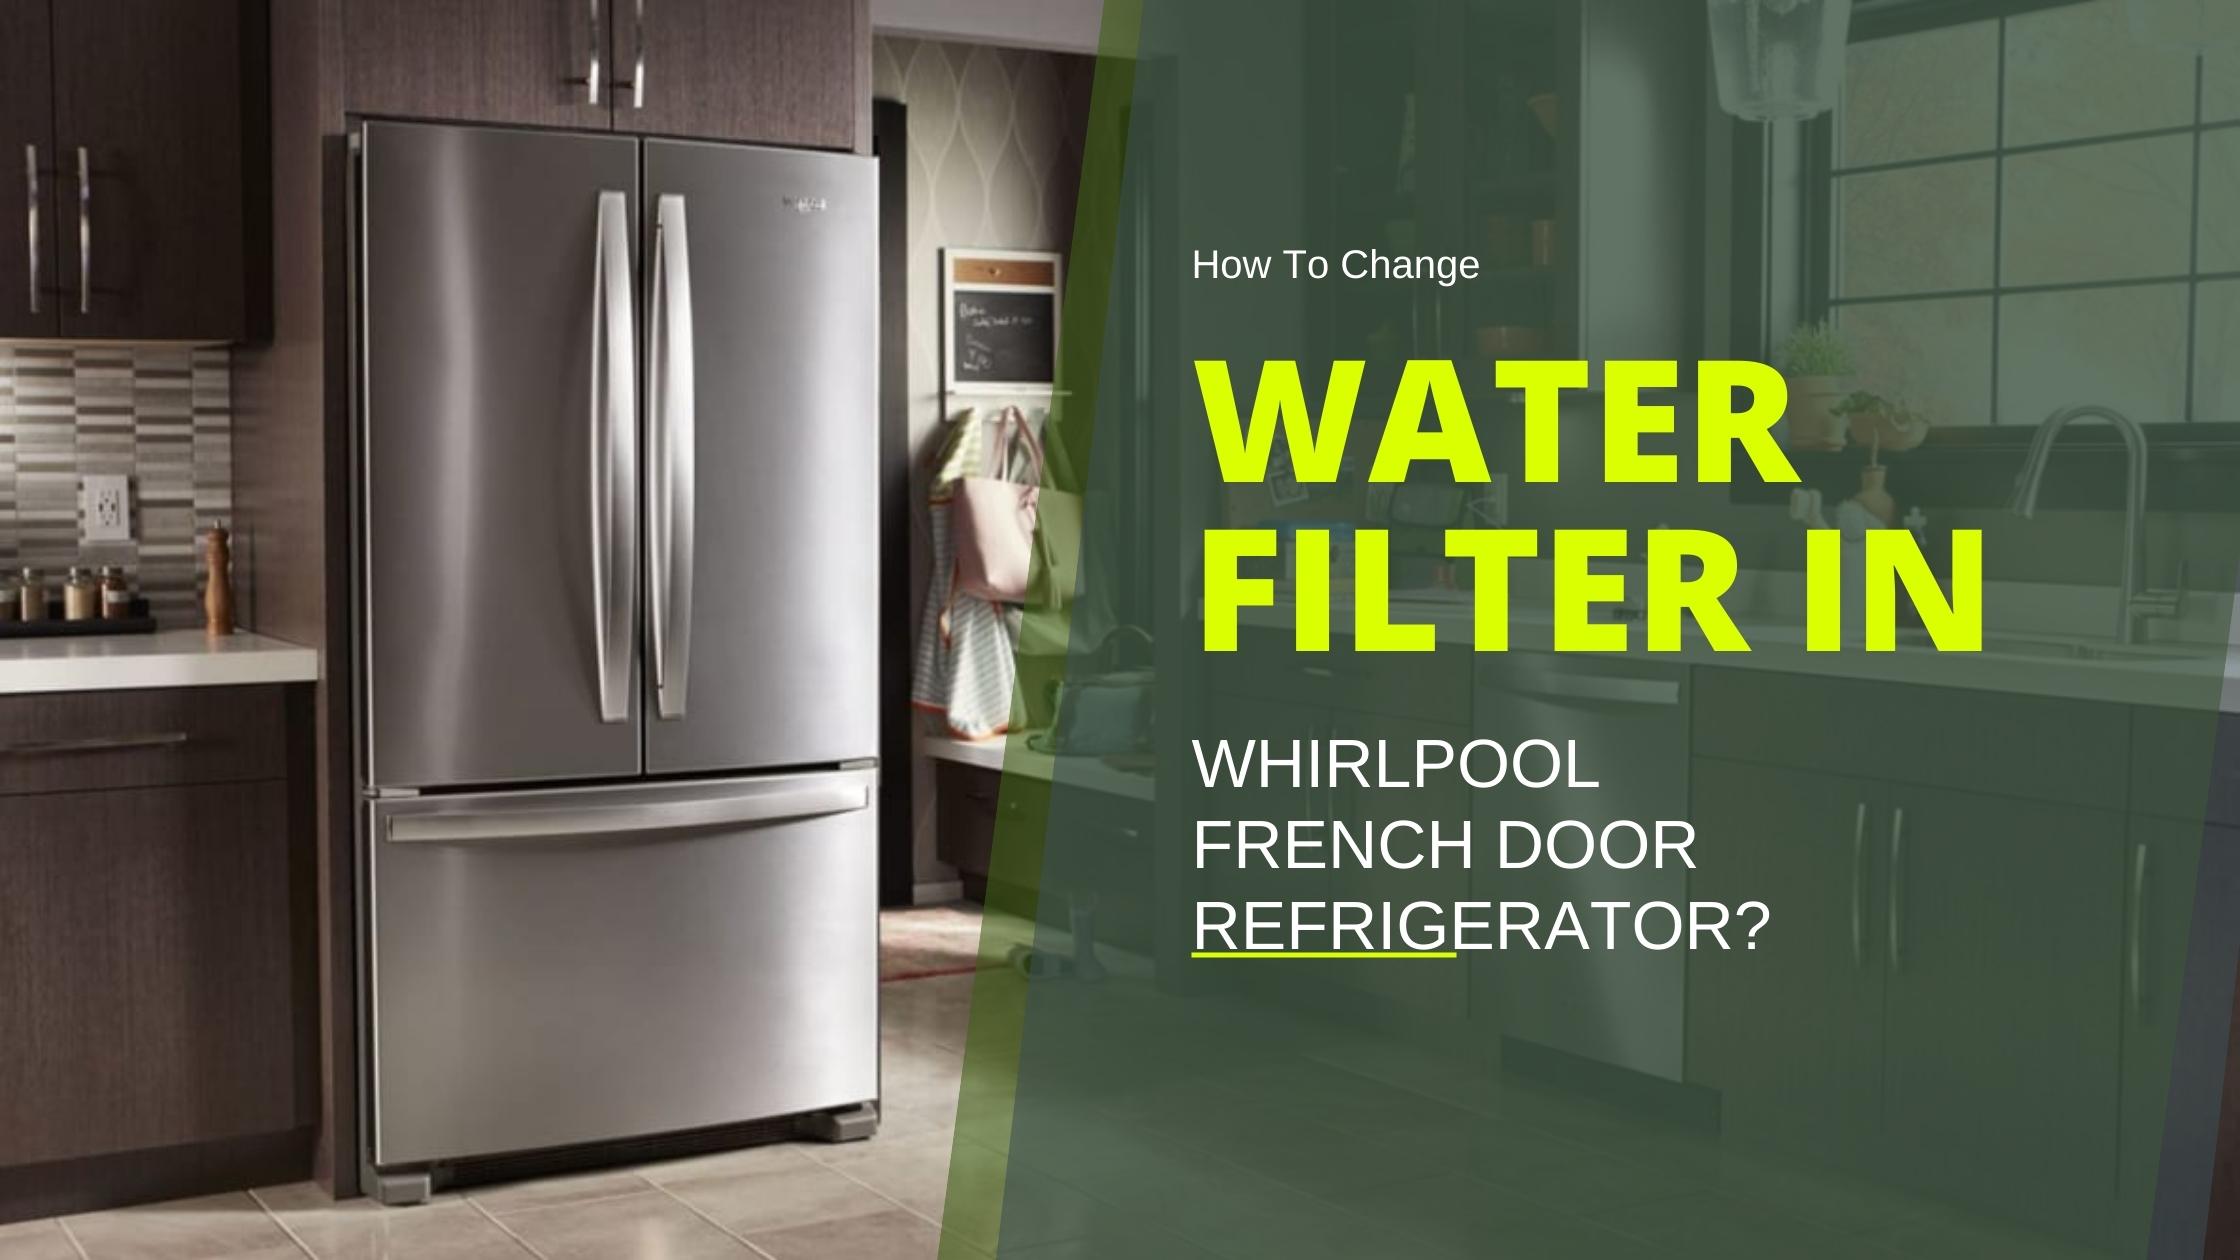 How To Change Water Filter In Whirlpool French Door Refrigerator?